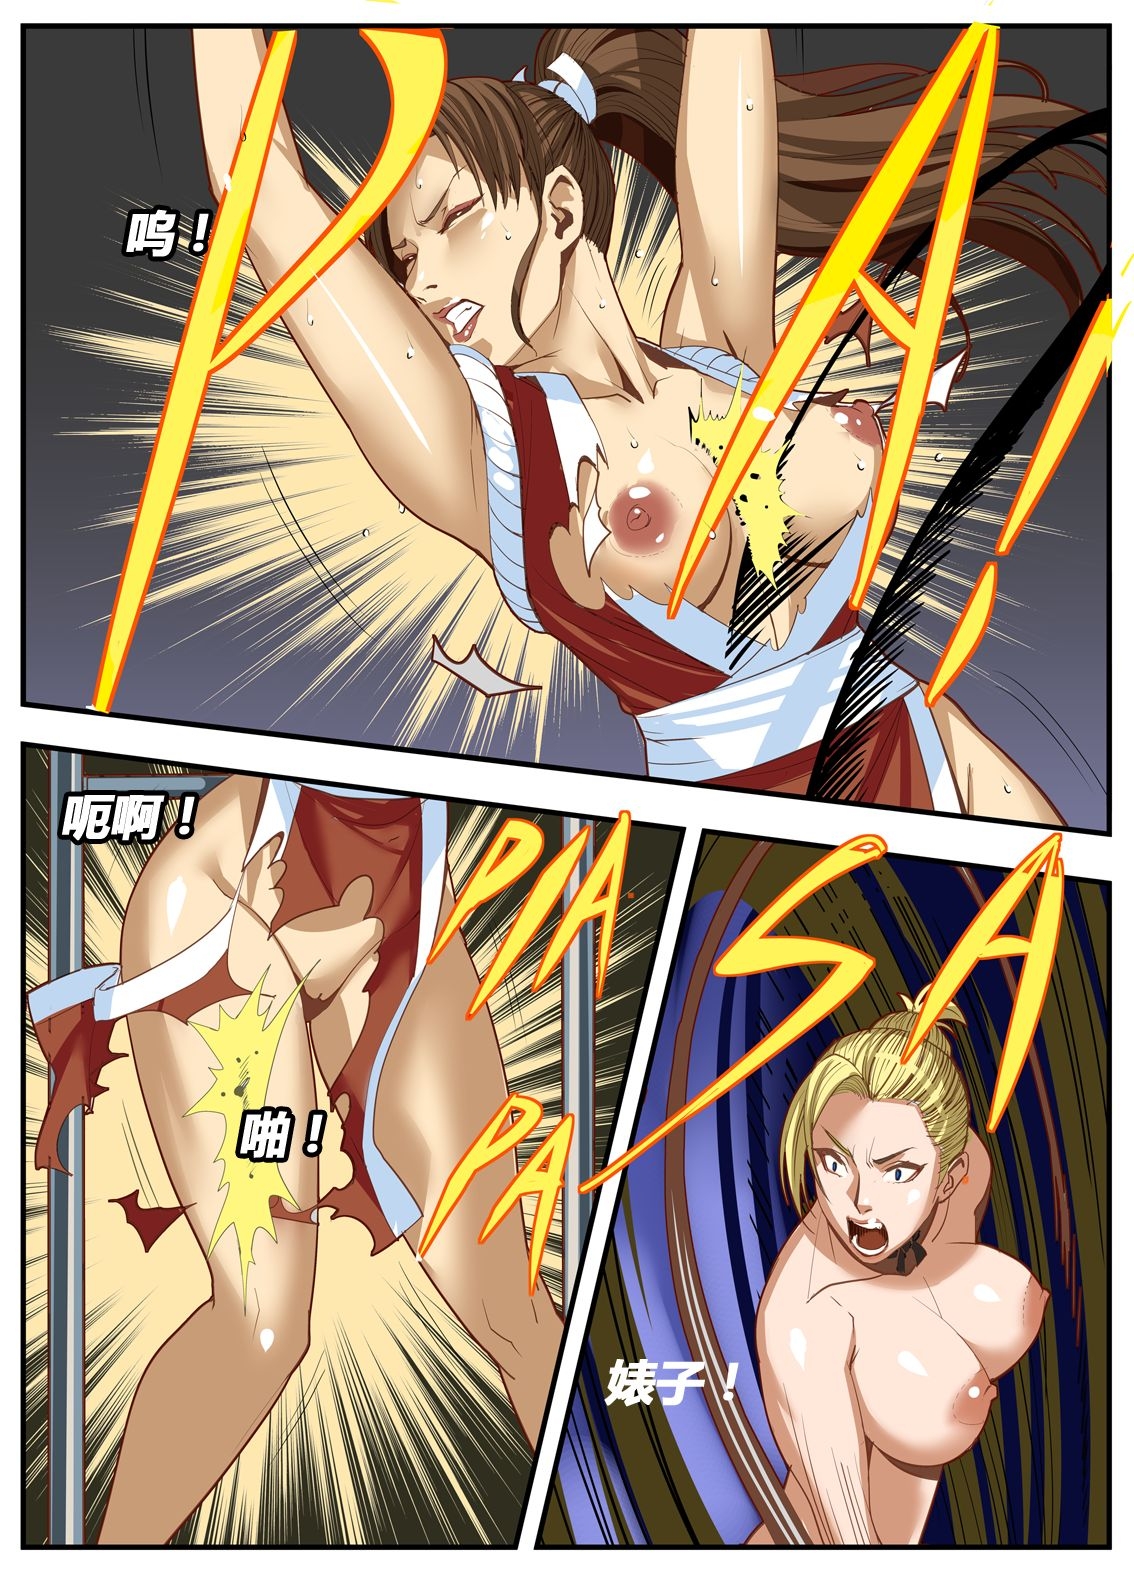 [chunlieater] The Lust of Mai Shiranui (King of Fighters) [Chinese] 42